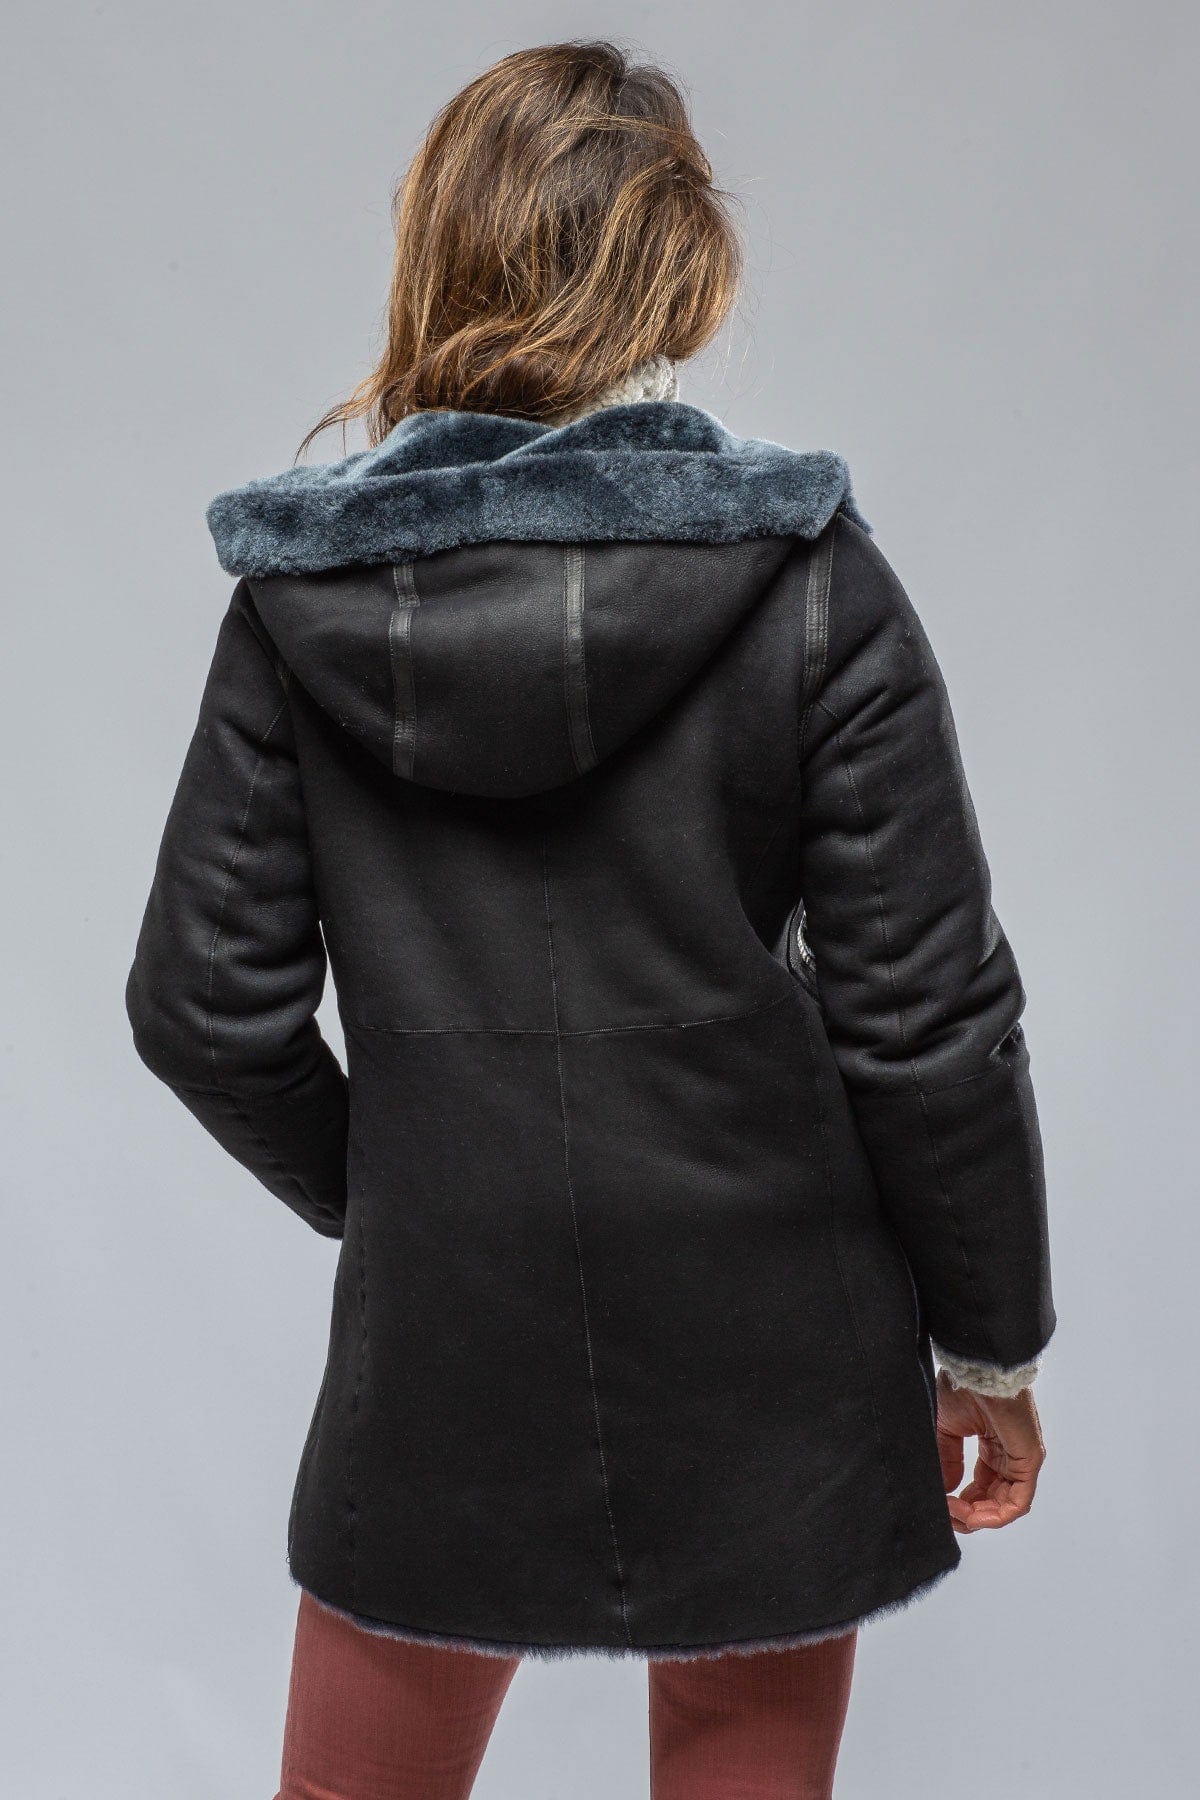 Trentino Reversible Side Snap Shearling In Navy - AXEL'S